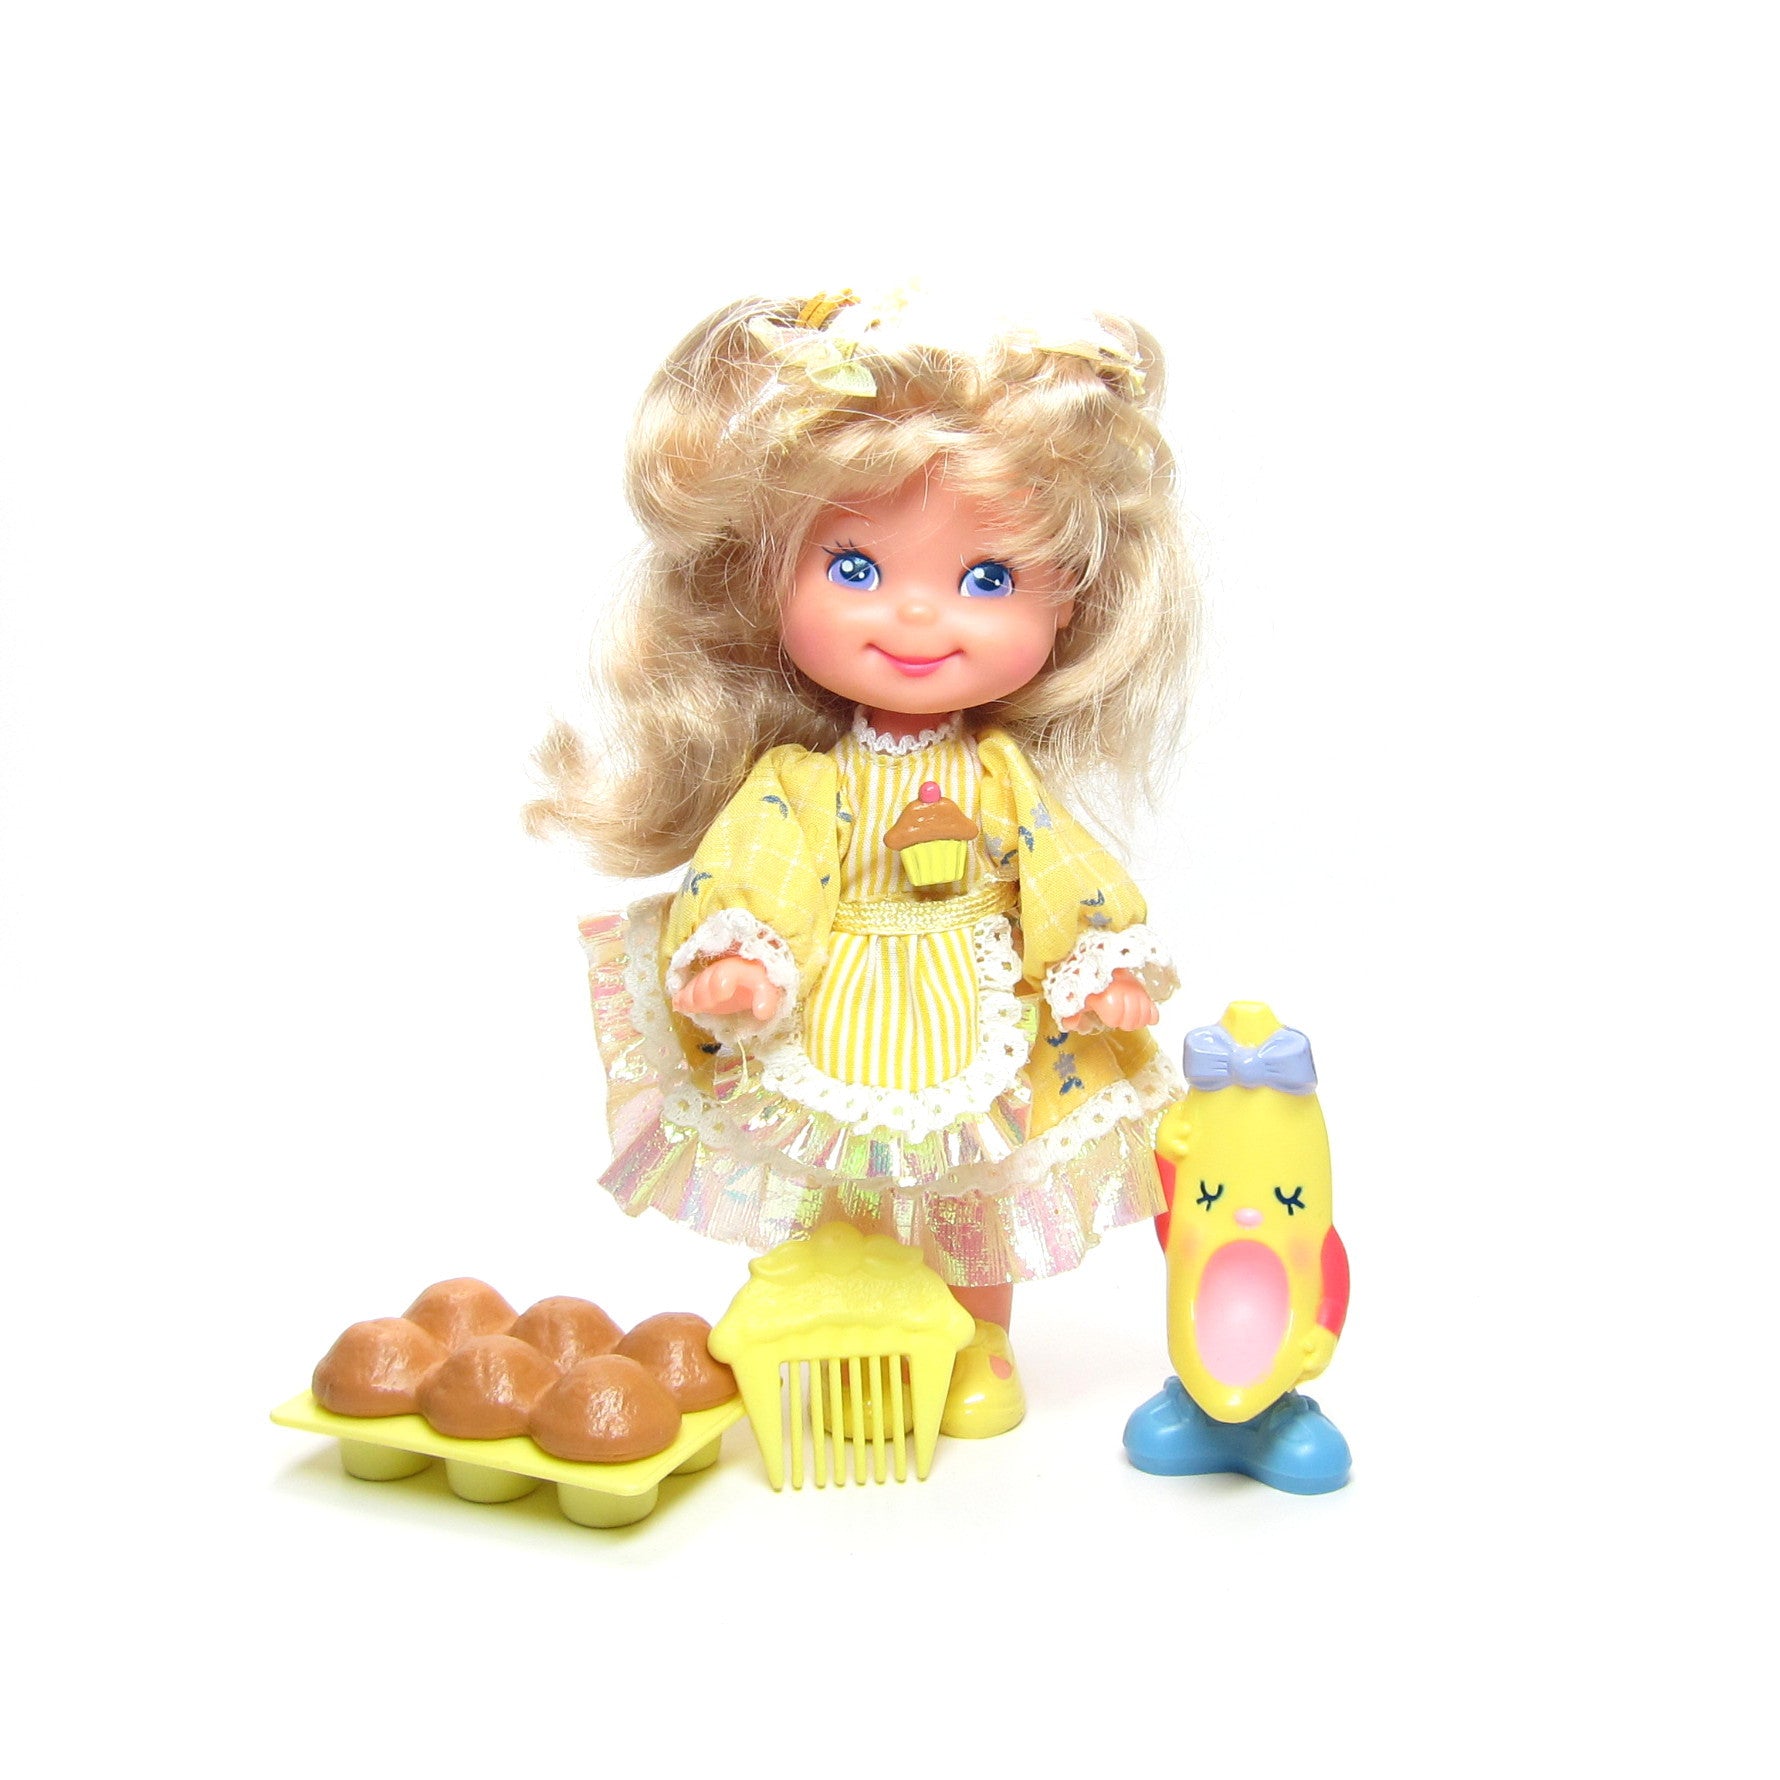 Banancy Cherry Merry Muffin doll with accessories